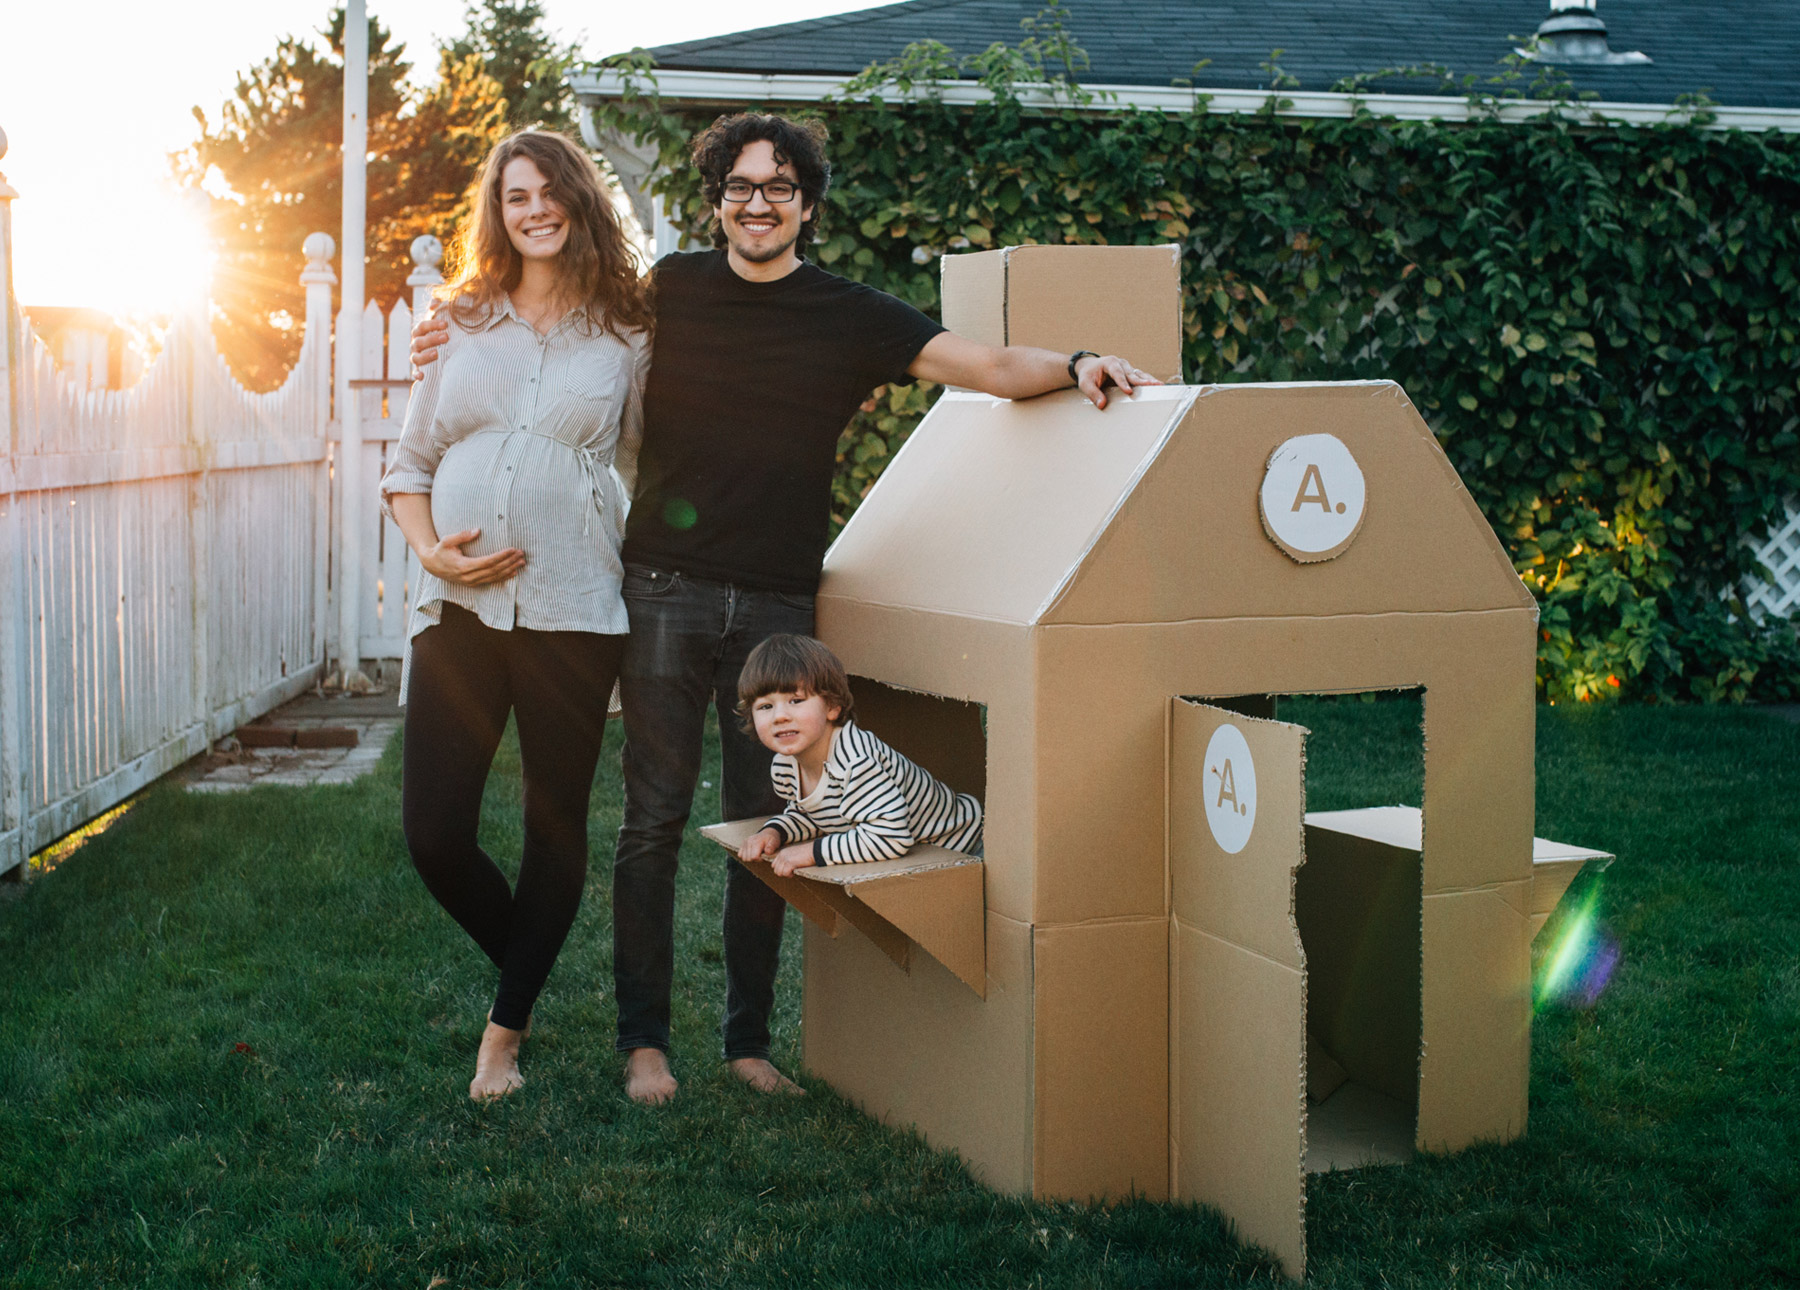 Jorge, Emmy Lou, and Matthias all pose excitedly with the fully completed box fort.